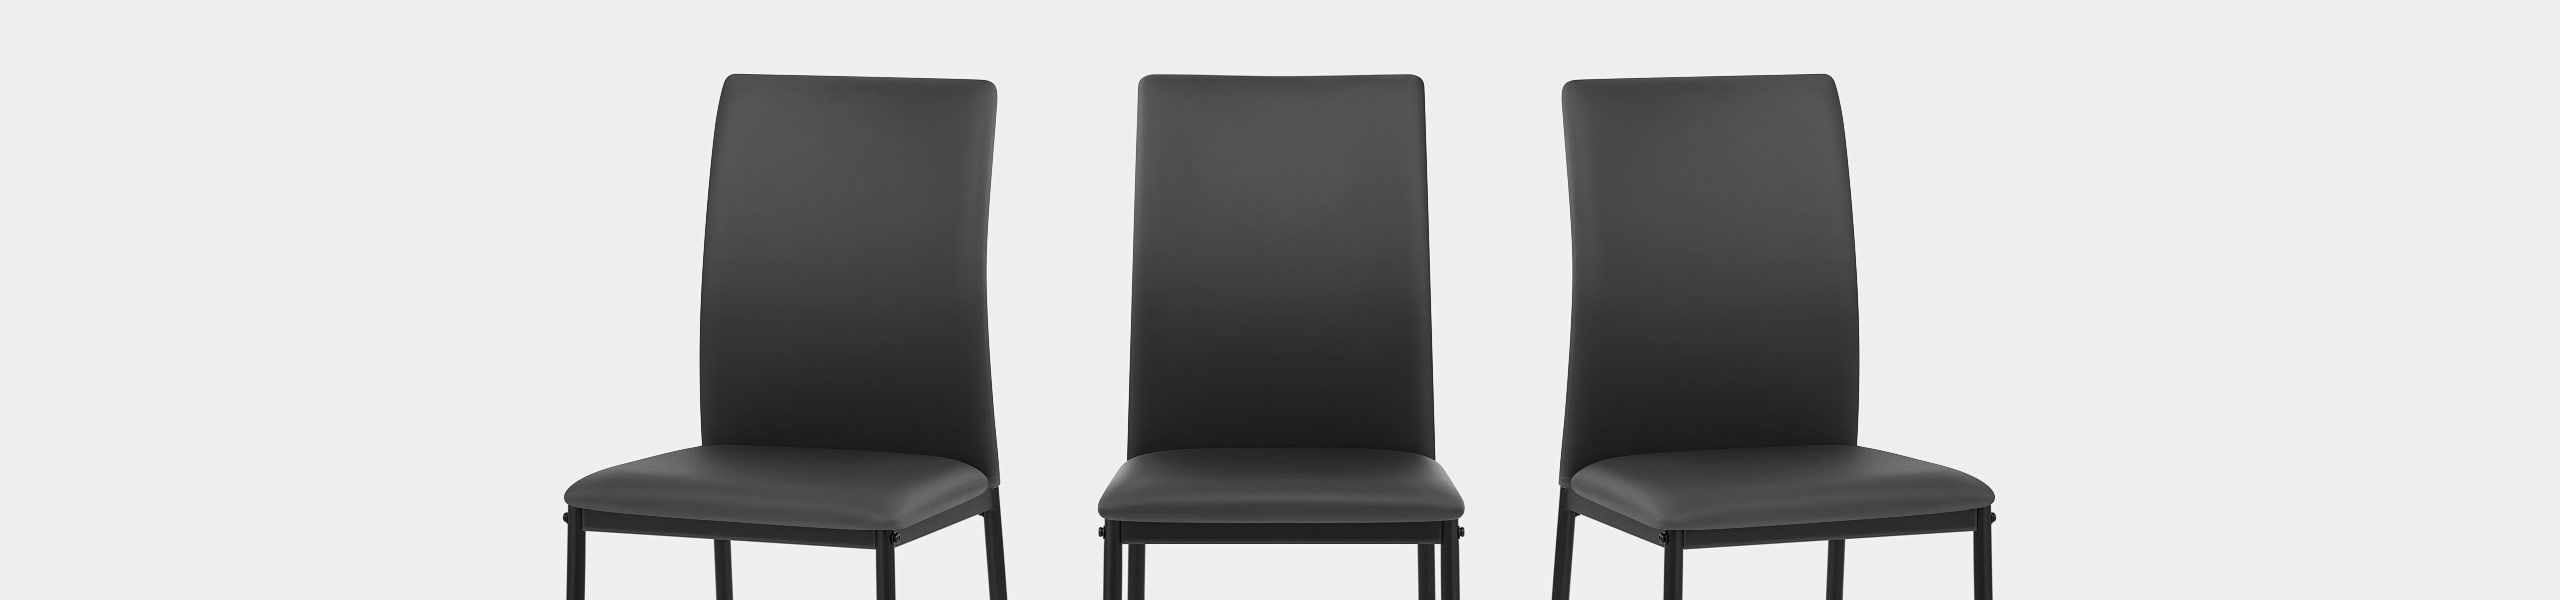 Franky Dining Chair Black Video Banner